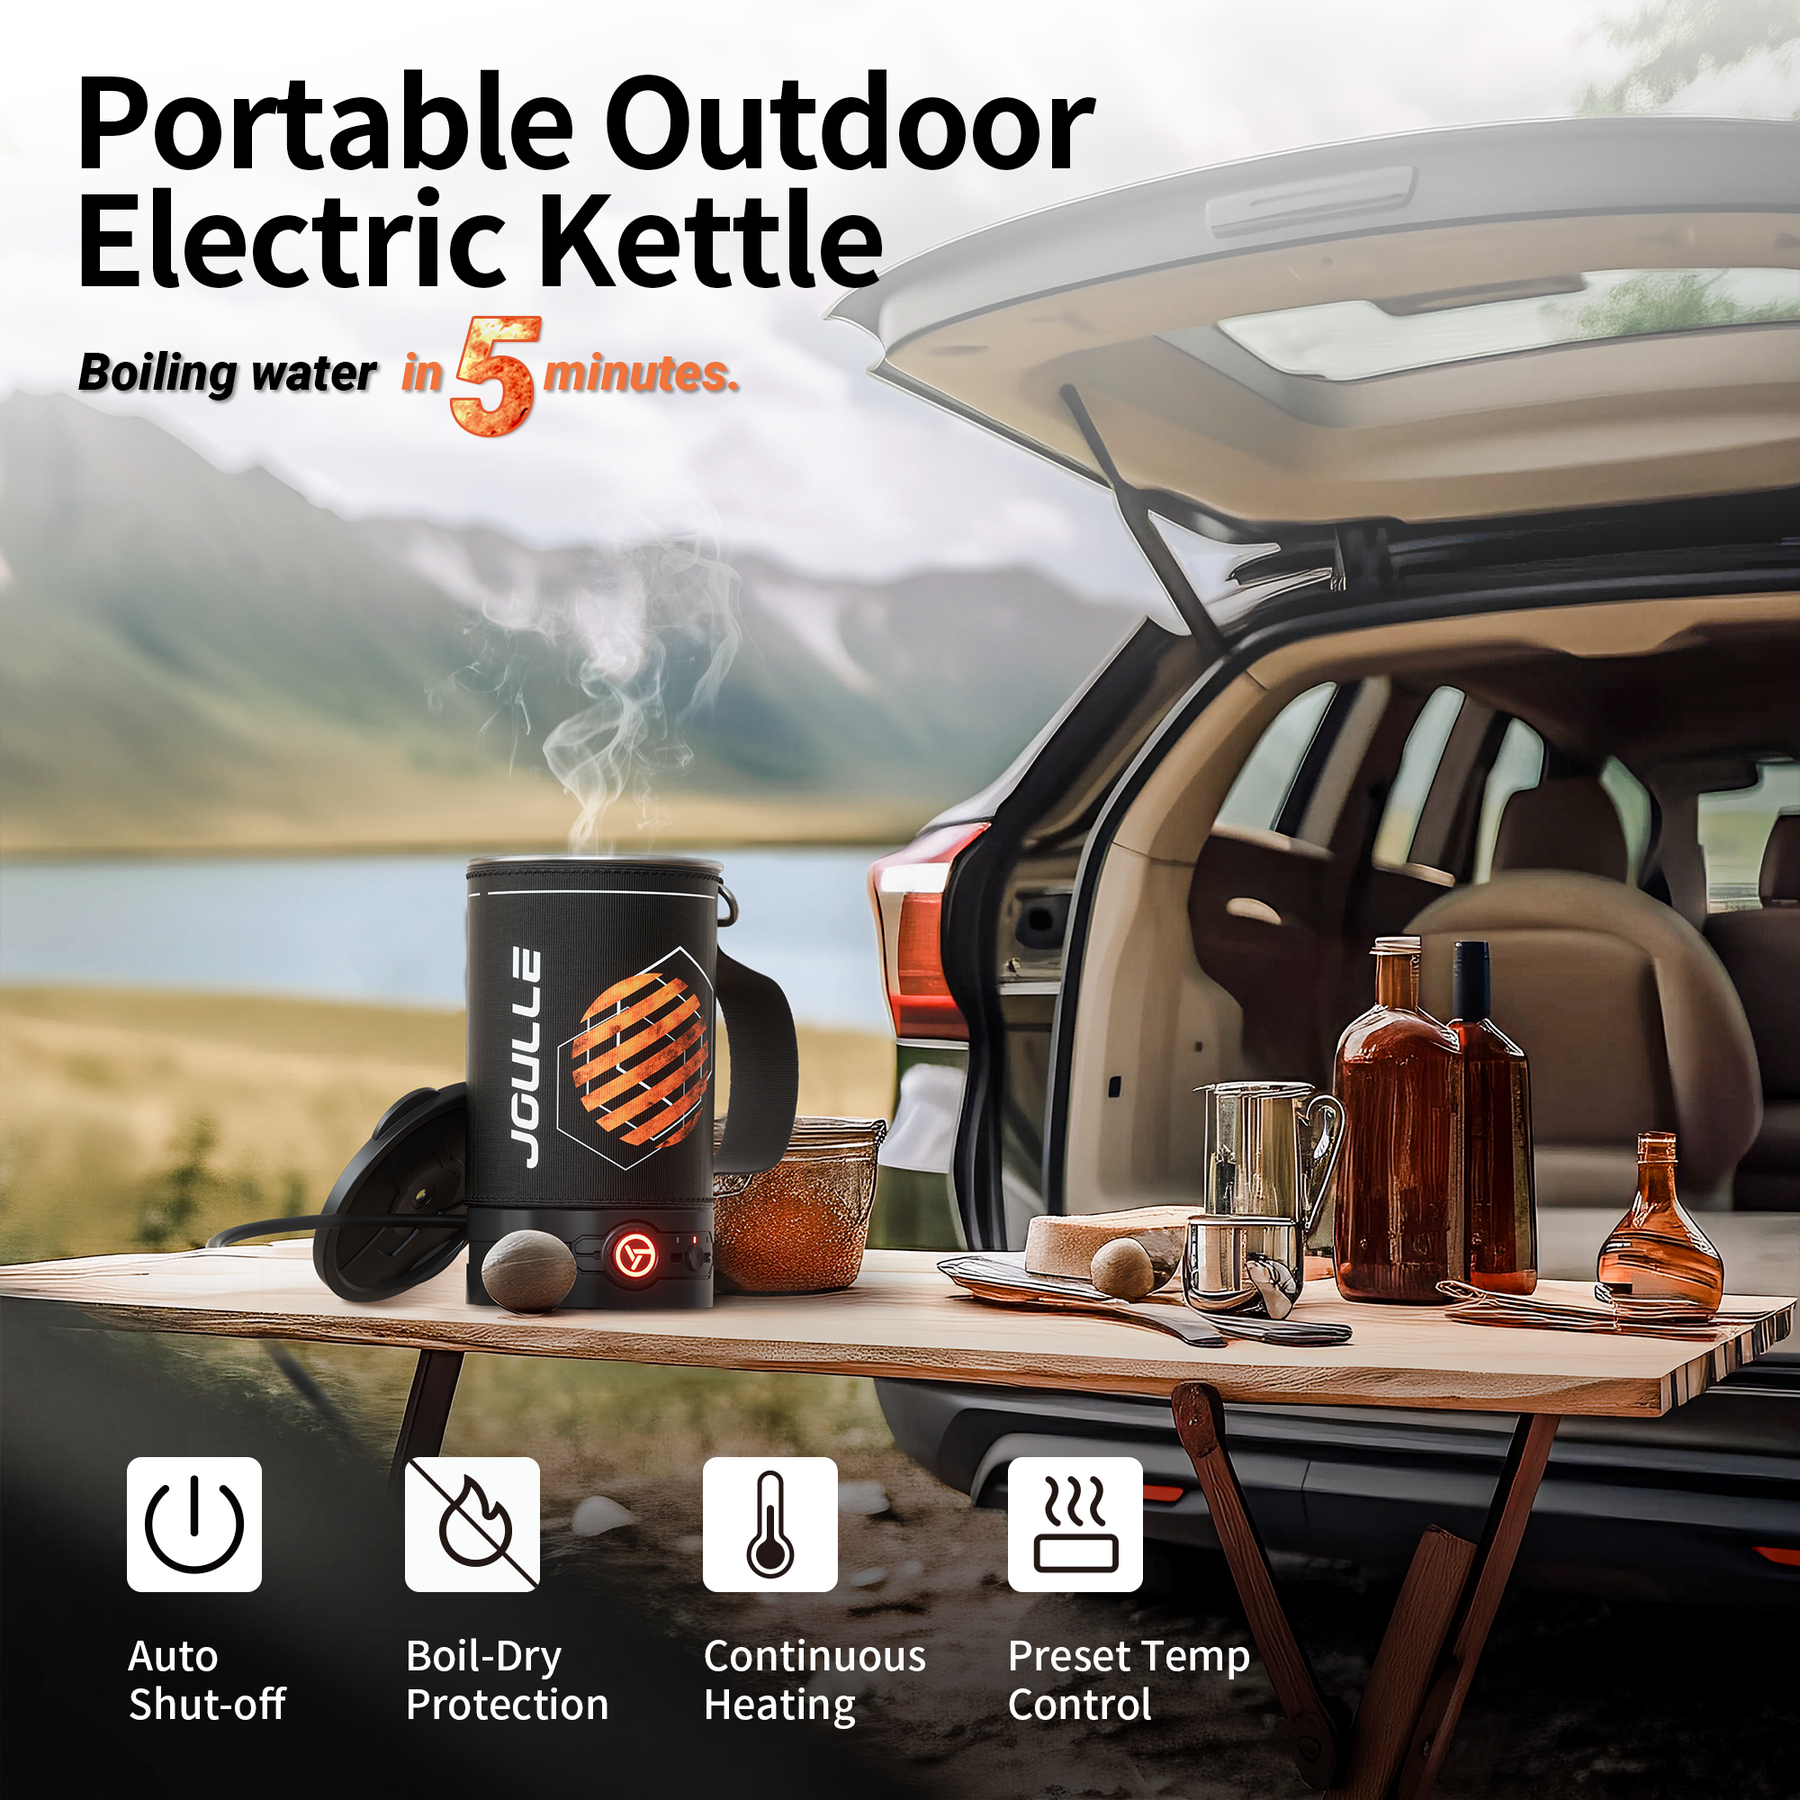 Portable Electric Kettle - JOULLE